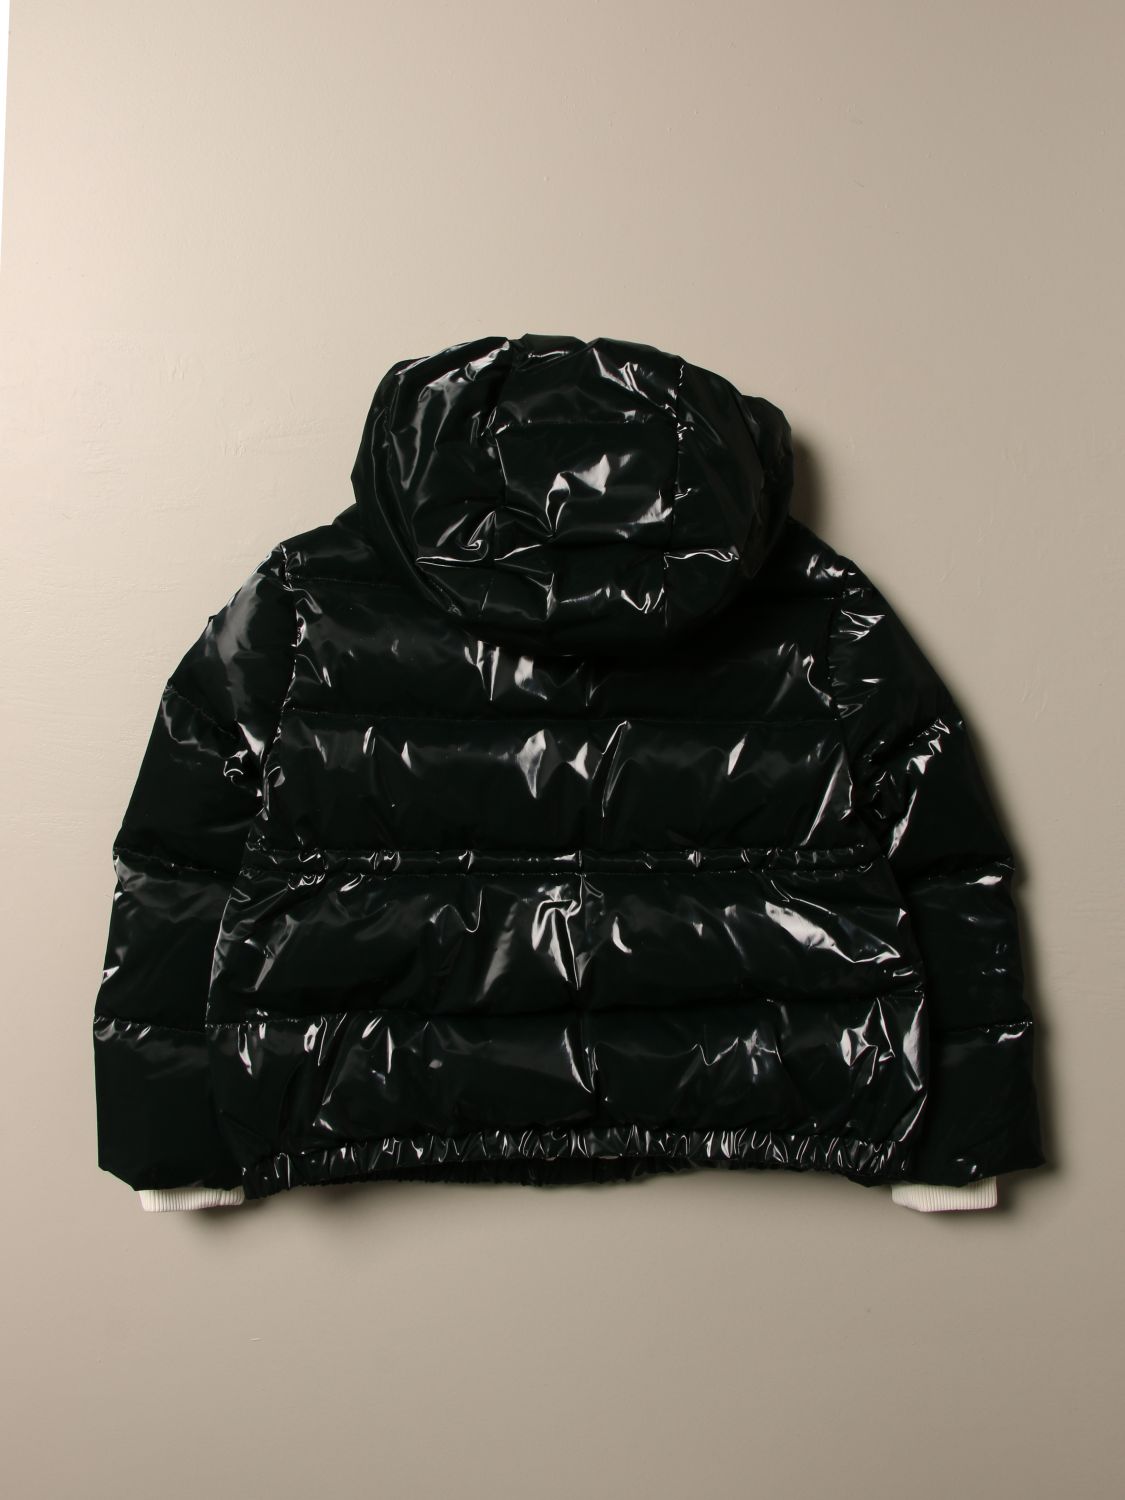 Moncler Glossy Jacket Deals, 57% OFF | www.ilpungolo.org